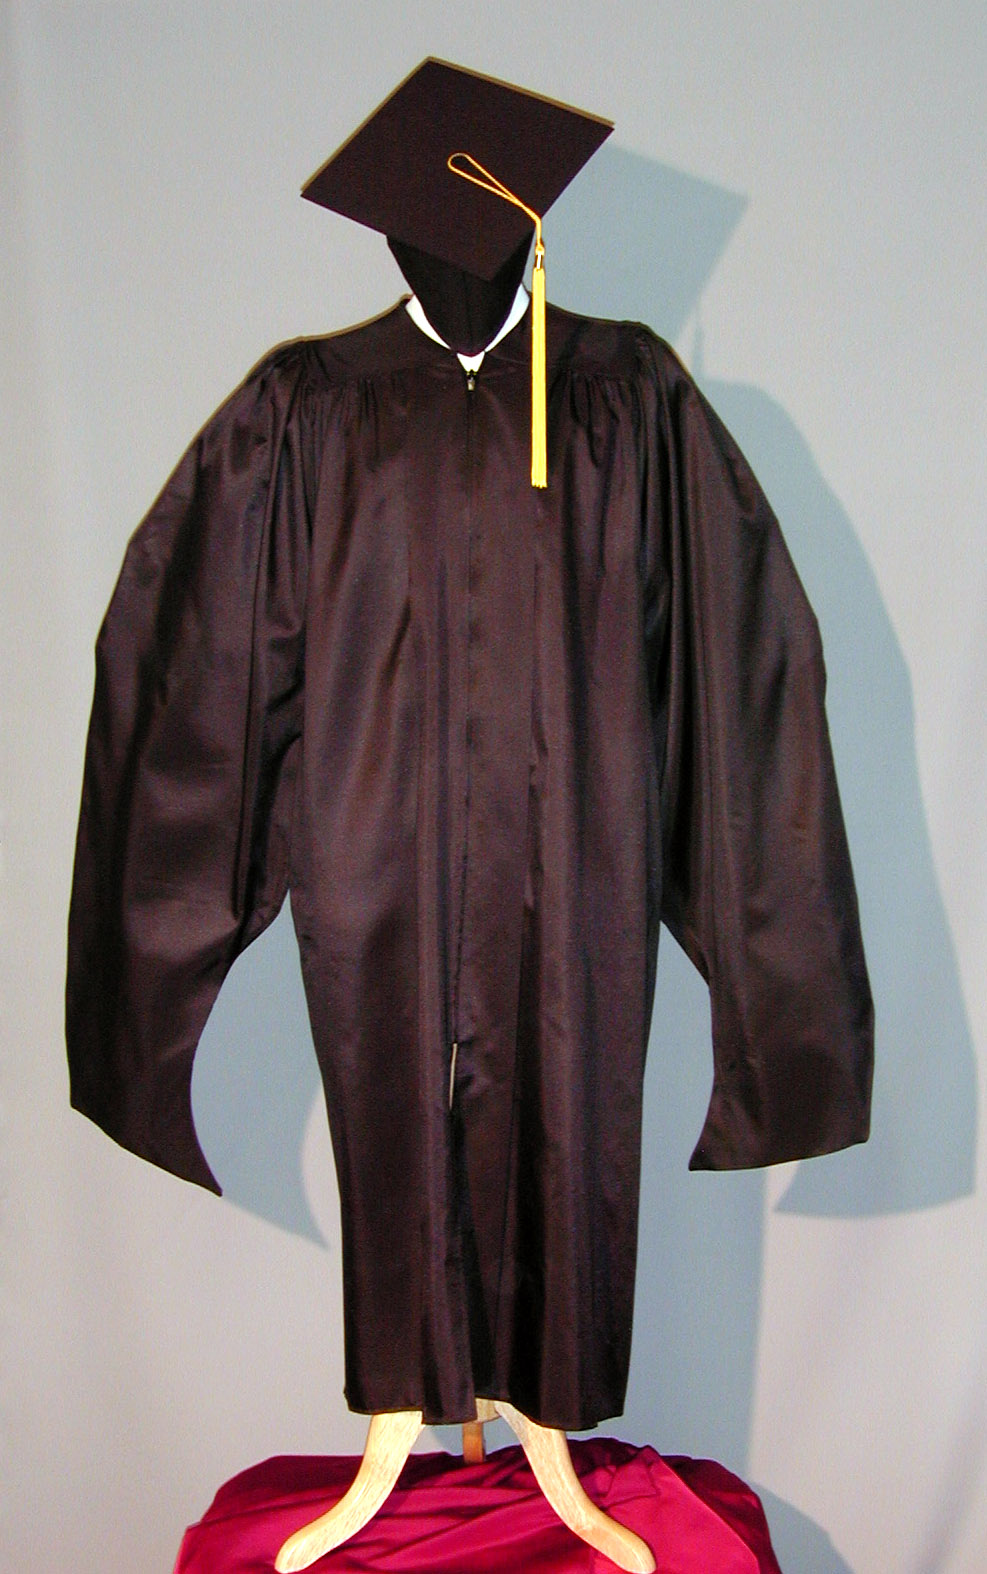 Verona Masters Gown